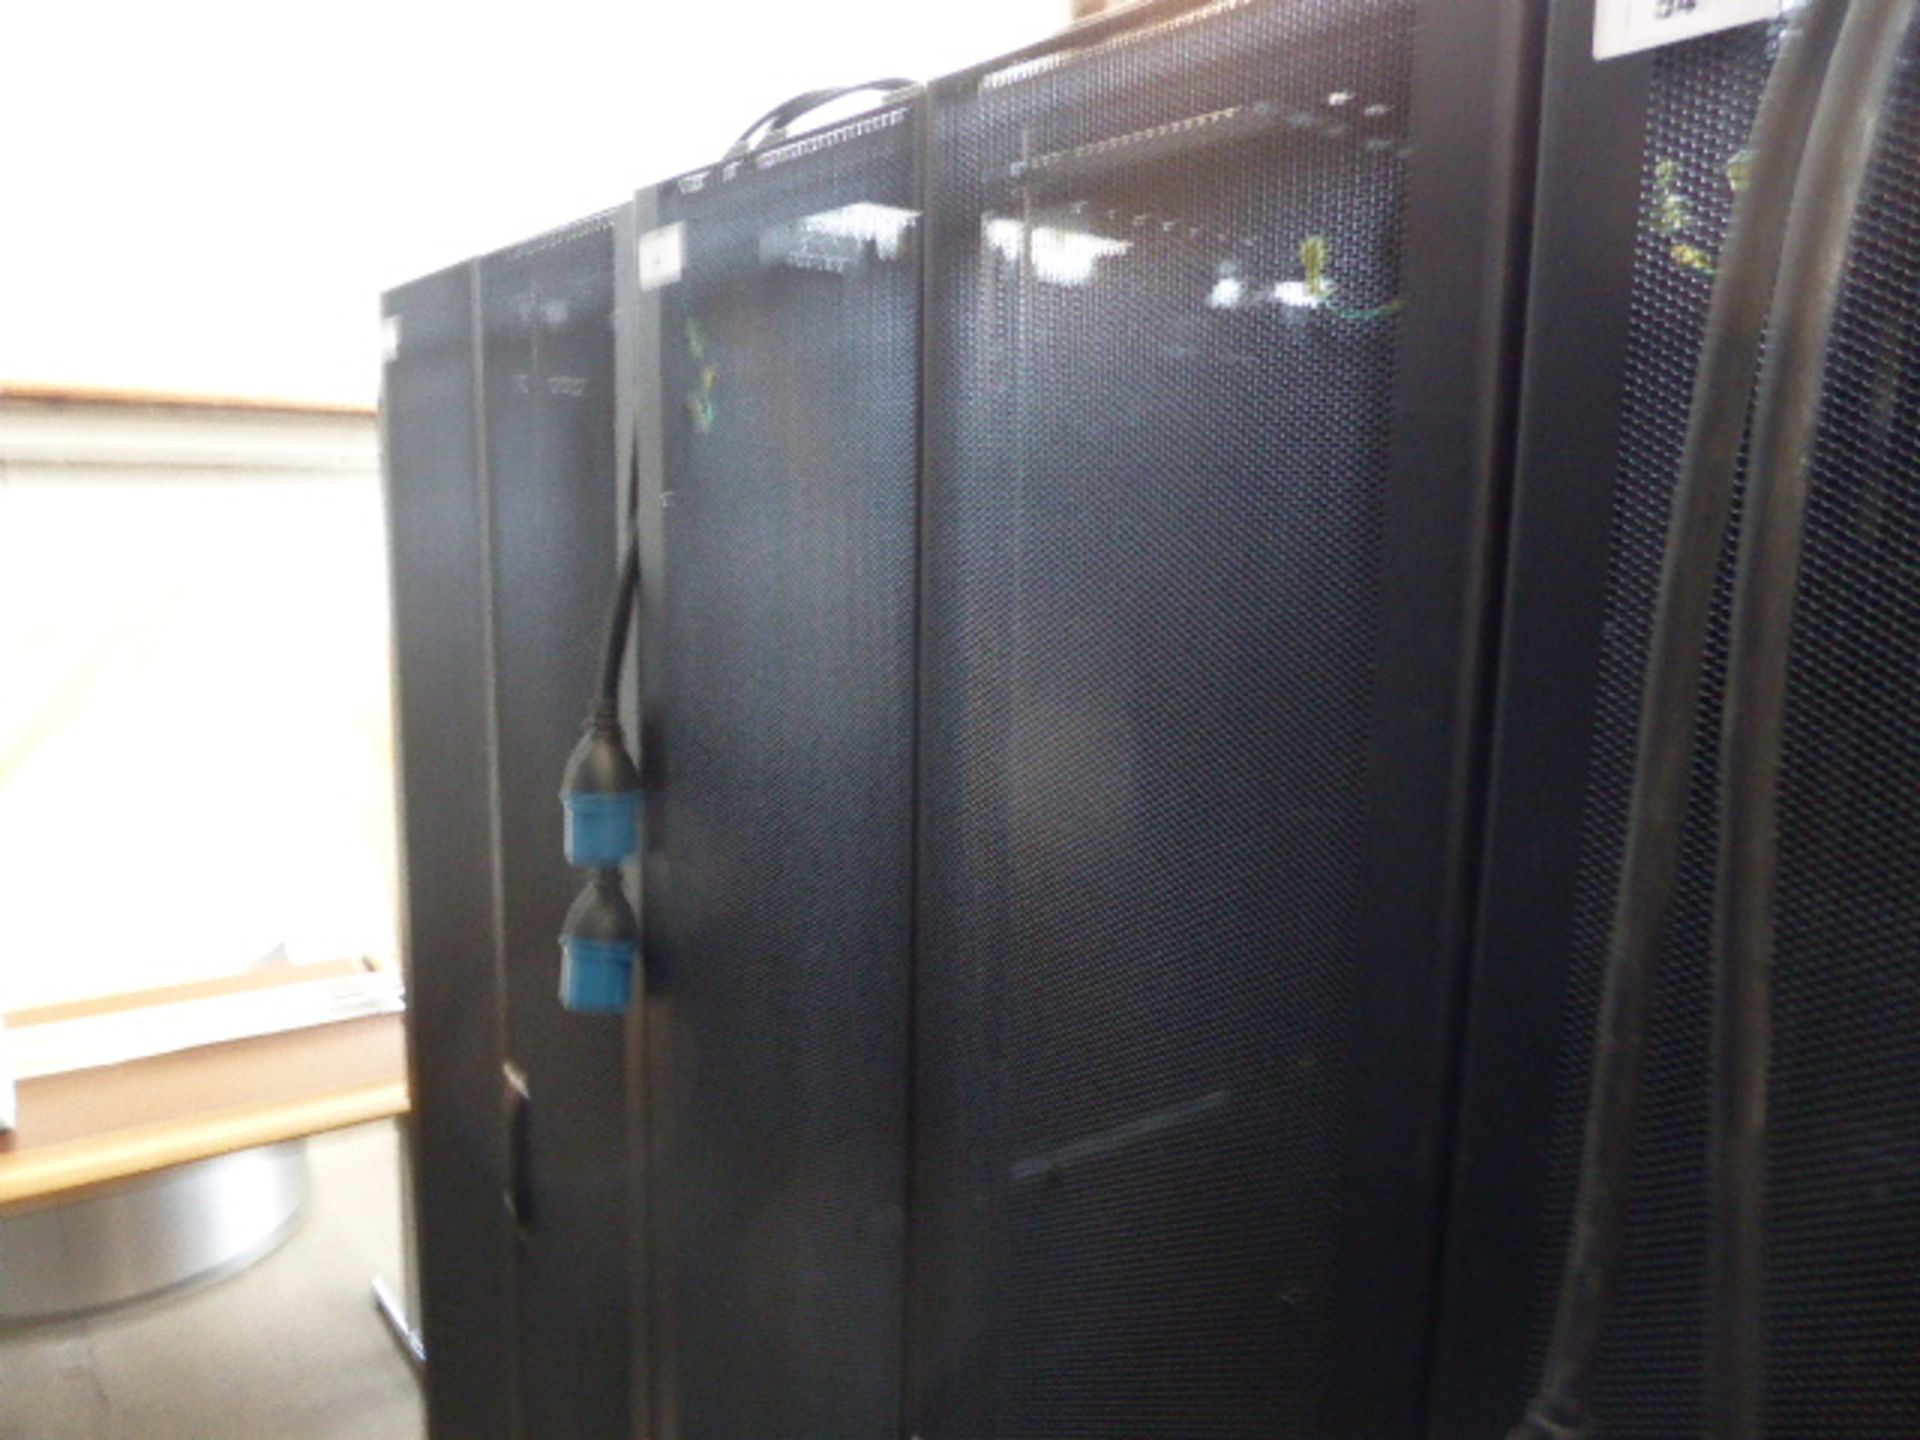 APC server cabinet on castors 75cm wide with 2 APC switch rack PDU units each with 24 outputs on